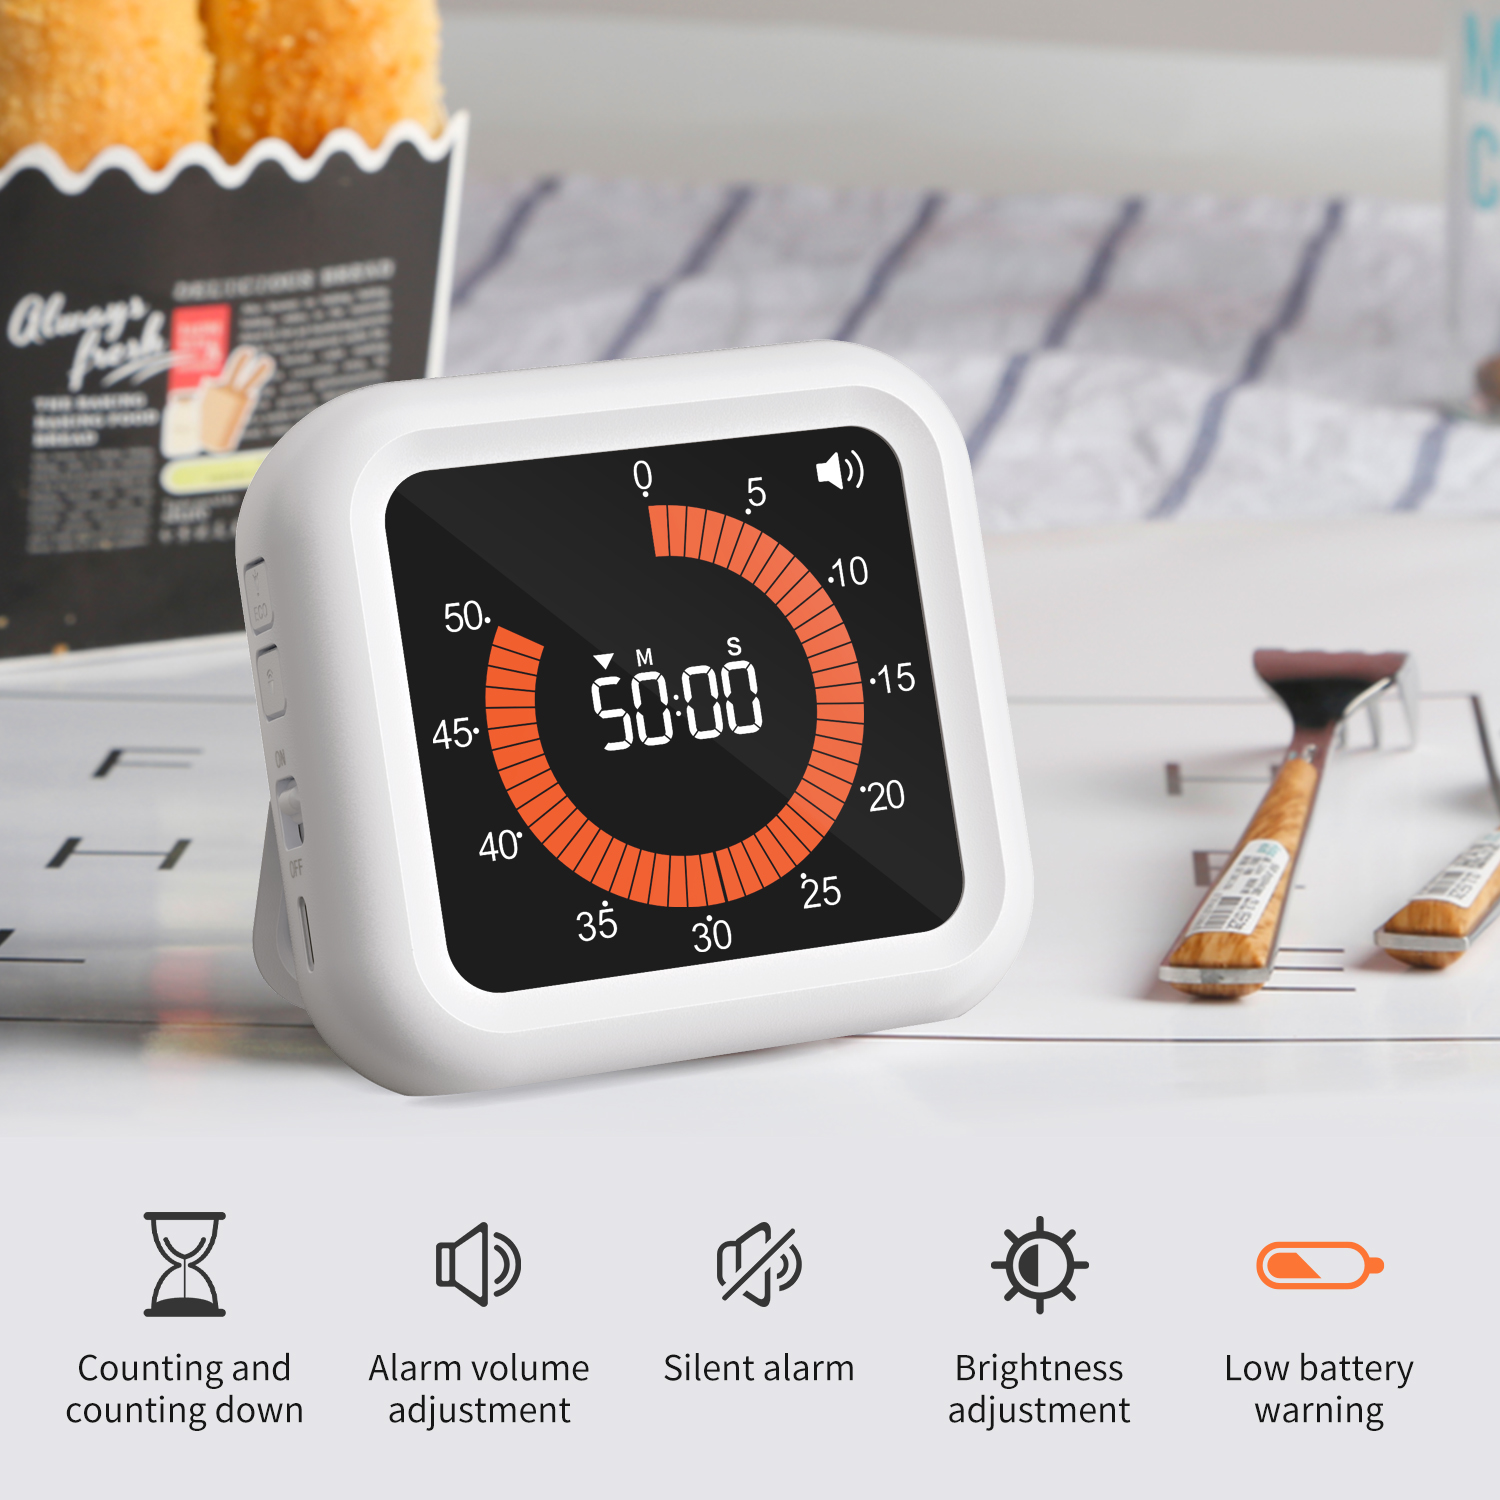 New Design Rotary Timer Smart Silent Visual Analog Timer For Kids And Adults Optional Alert Hour Meter For kitchen Indoor